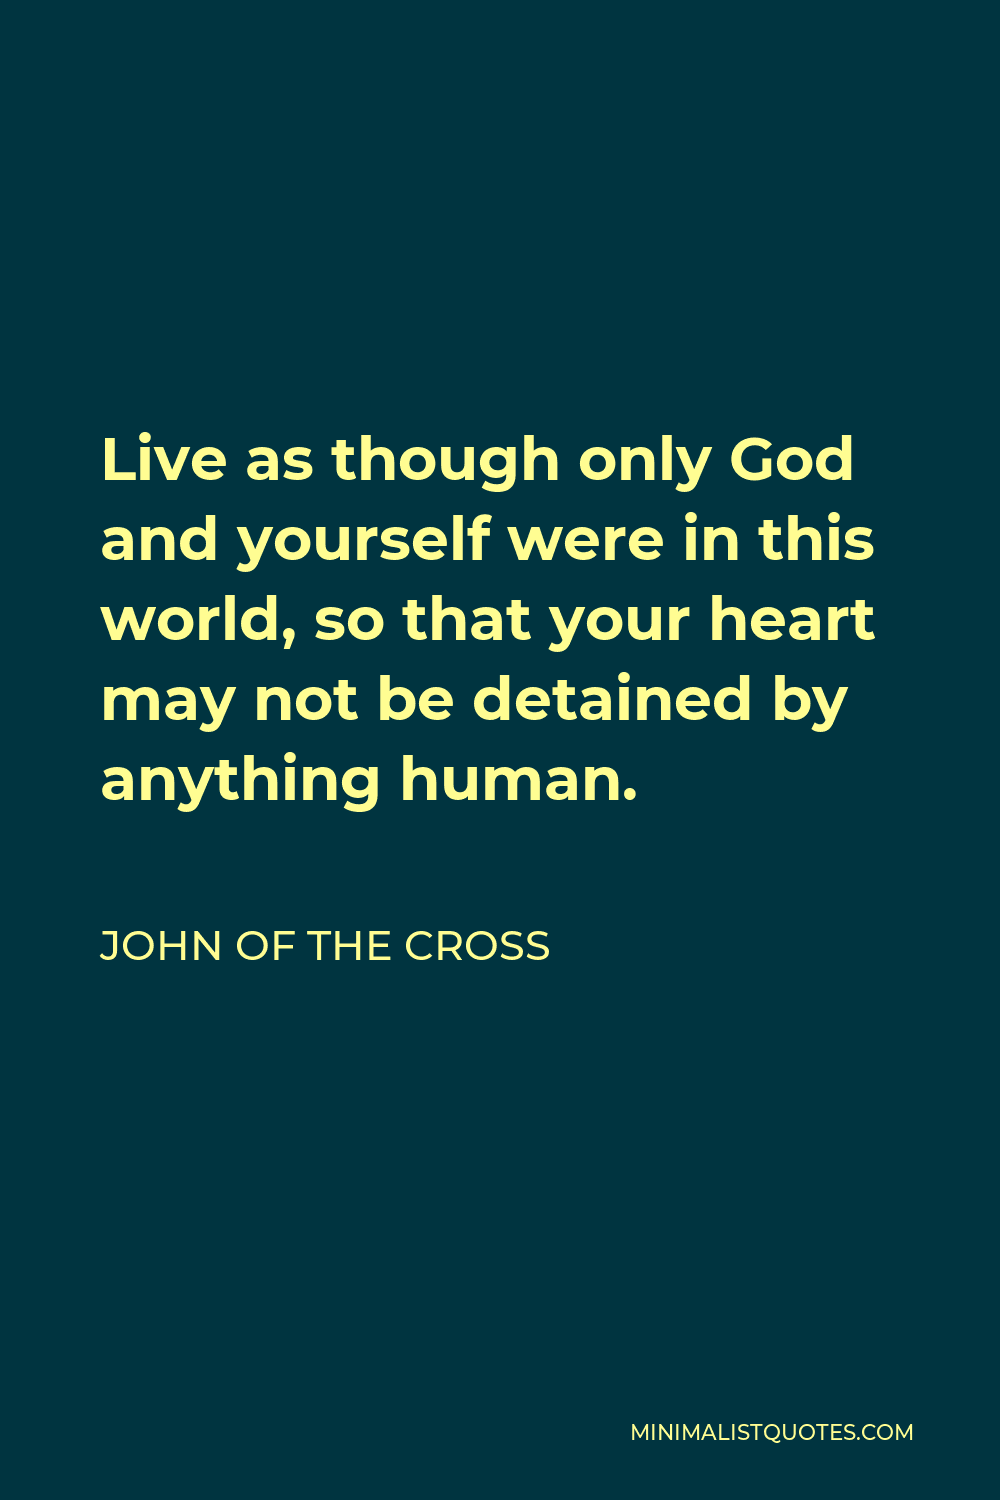 John of the Cross Quote - Live as though only God and yourself were in this world, so that your heart may not be detained by anything human.